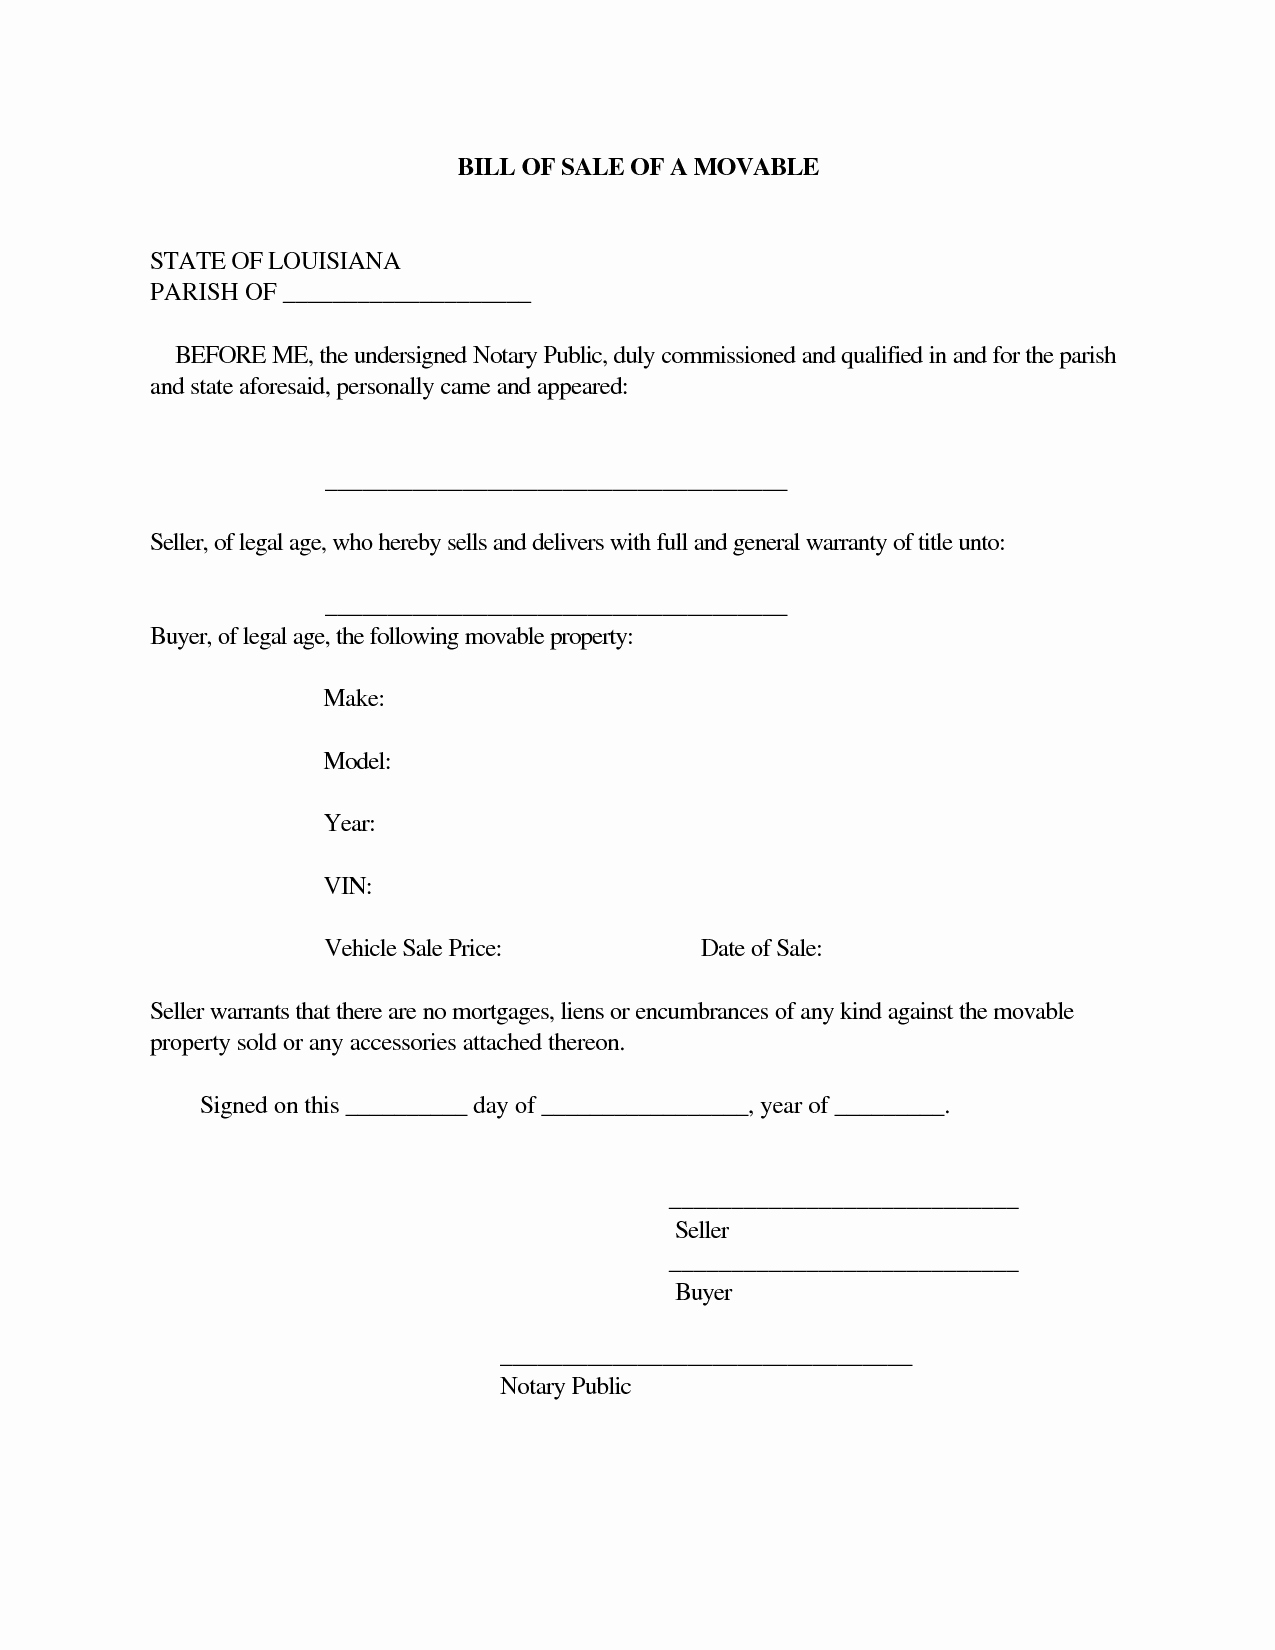 Simple Bill Of Sale forms Lovely Free Printable Rv Bill Of Sale form form Generic